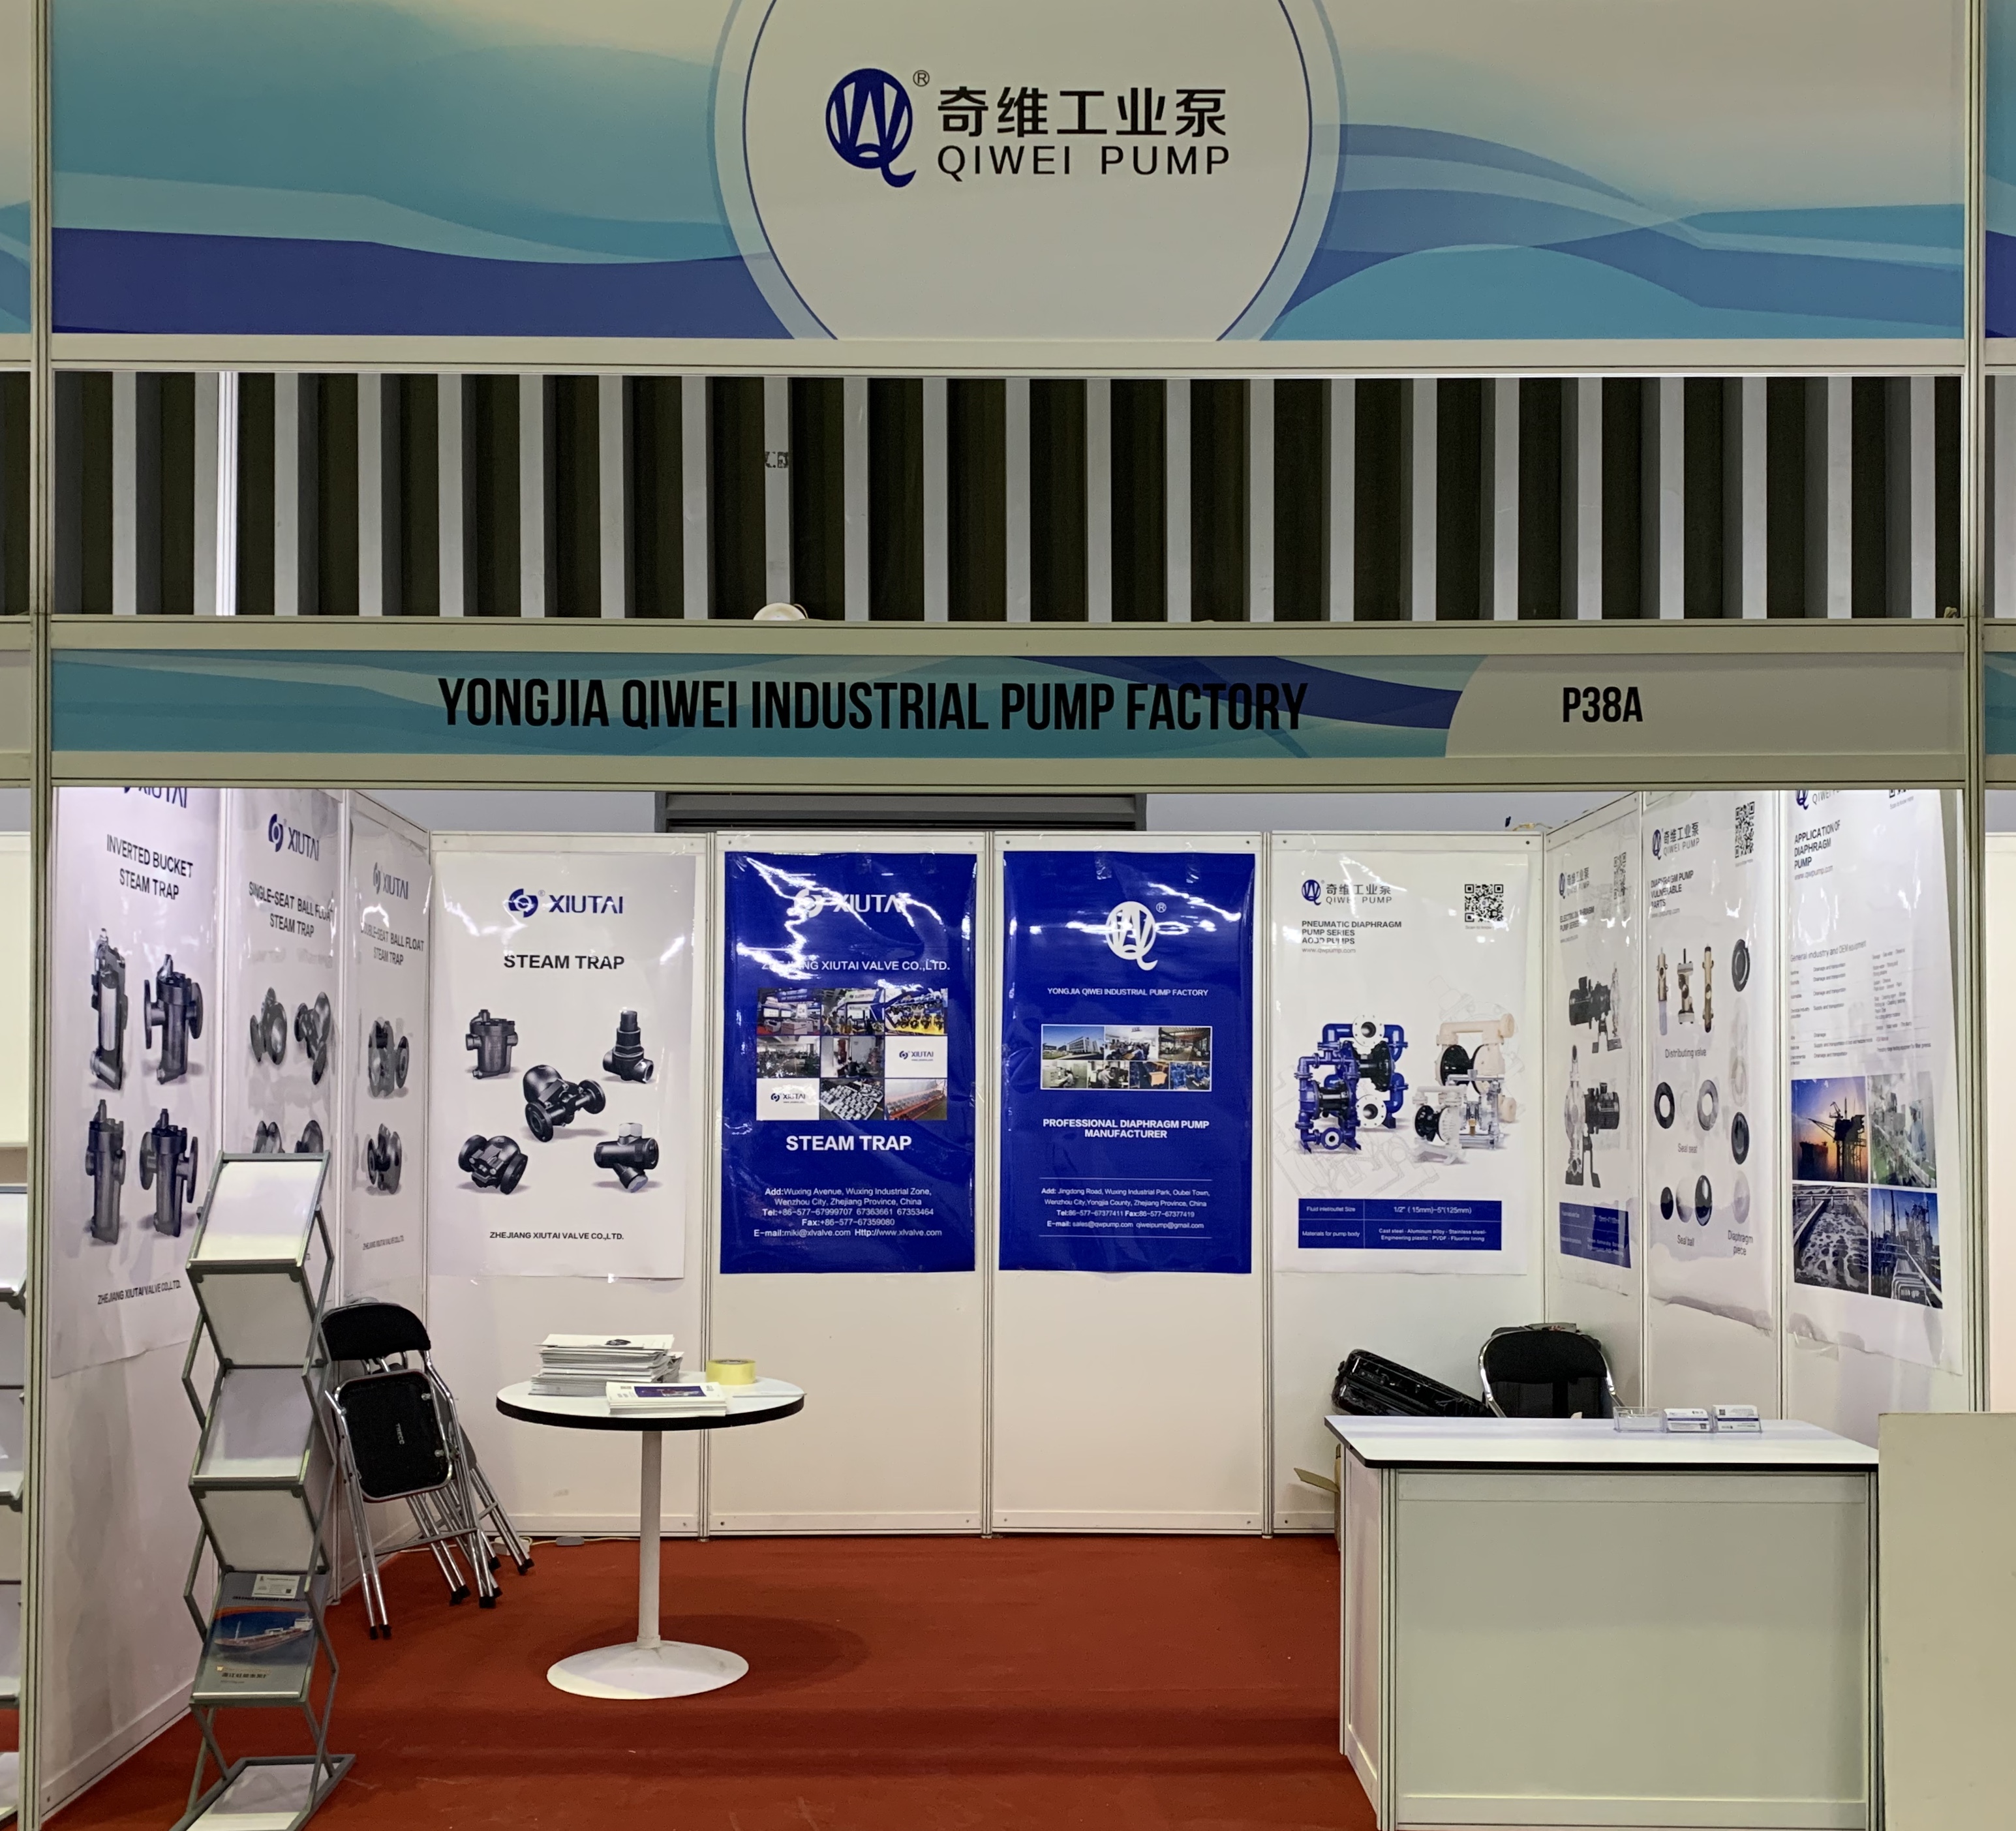 QIWEI INDUSTRIAL PUMP 2019 VIETWATER-Water & Wastewater Industry Show